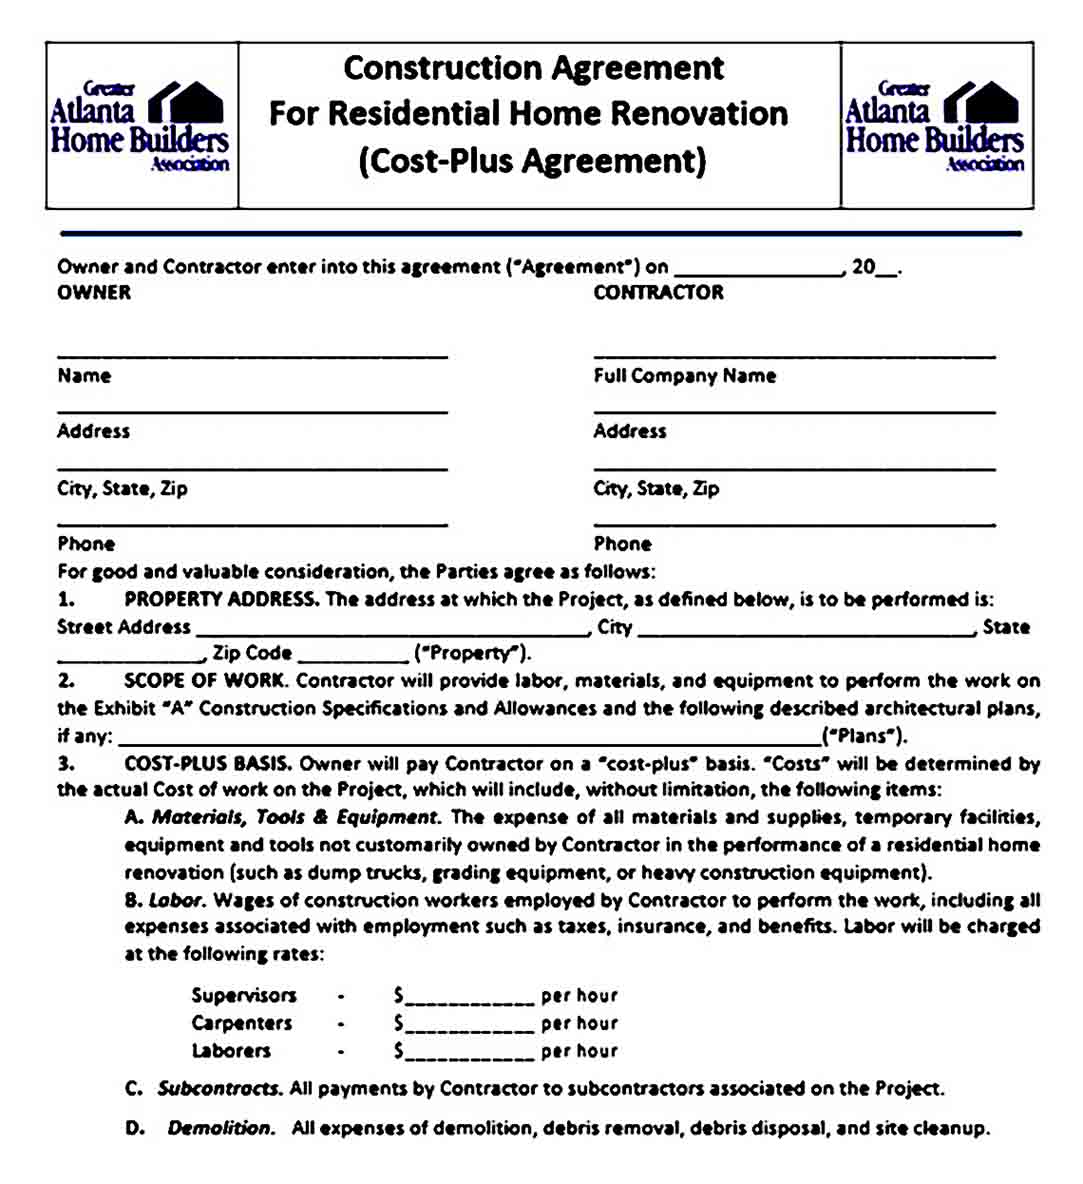 Construction Agreement For Residential